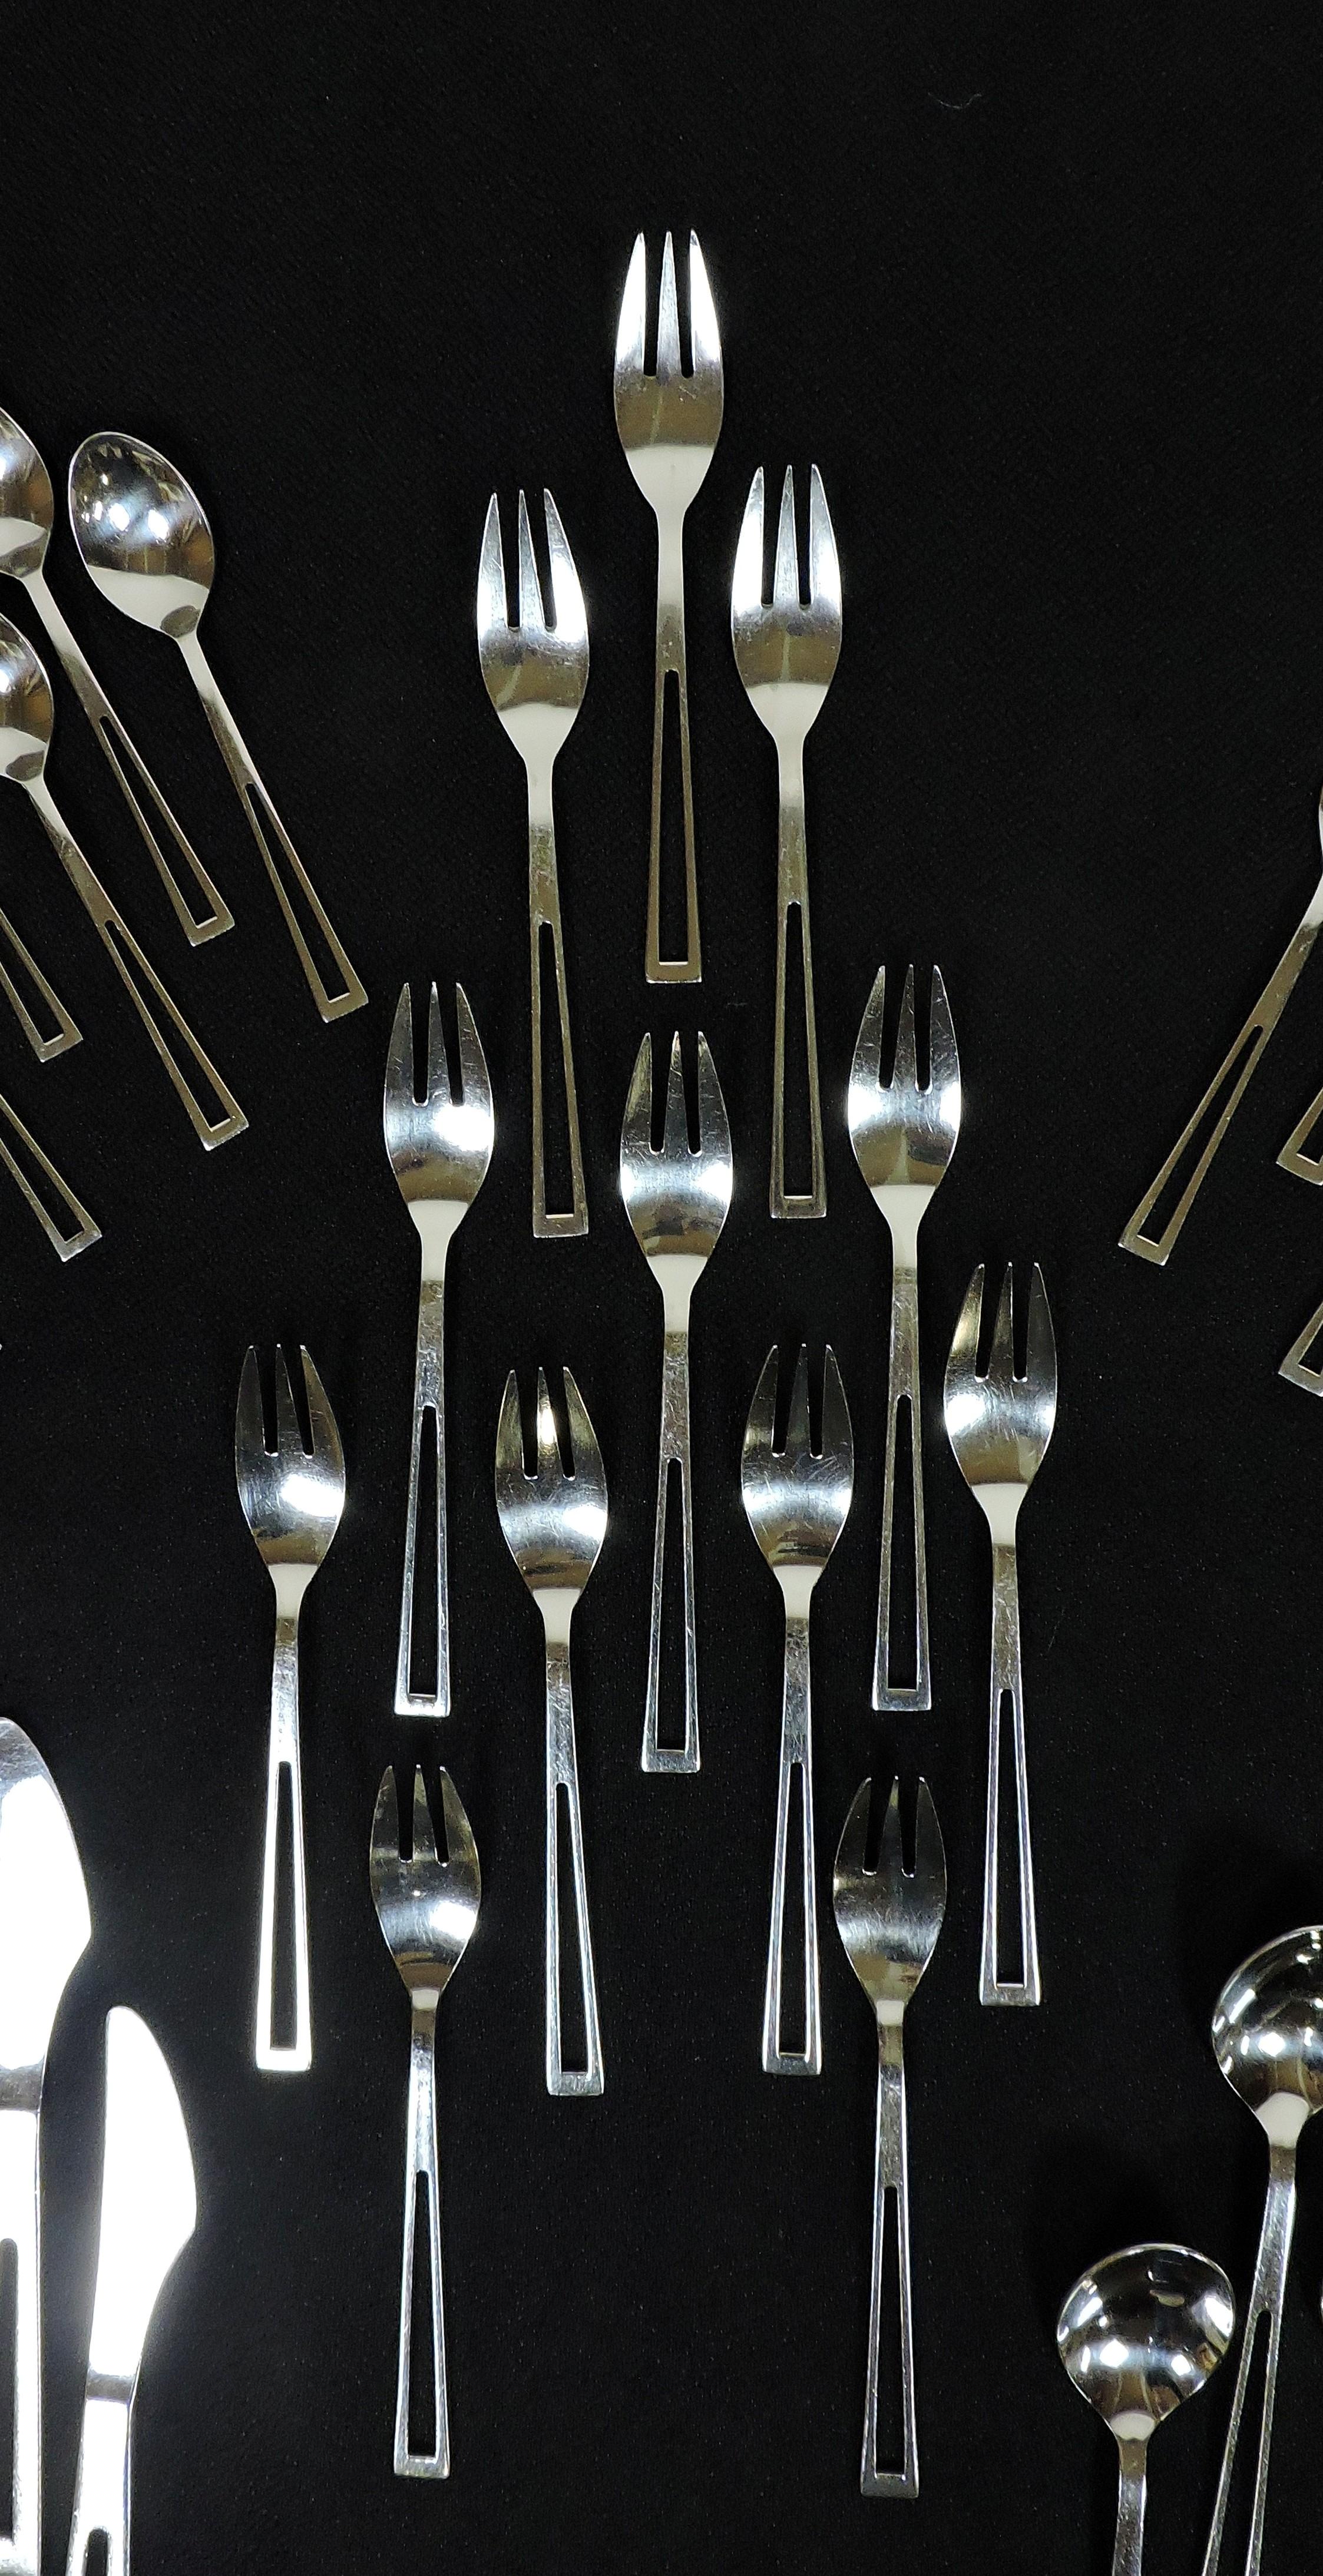 Stainless Steel Towle Aperto Avanti Celsa Style Mid-Century Modern Stainless Flatware for 12